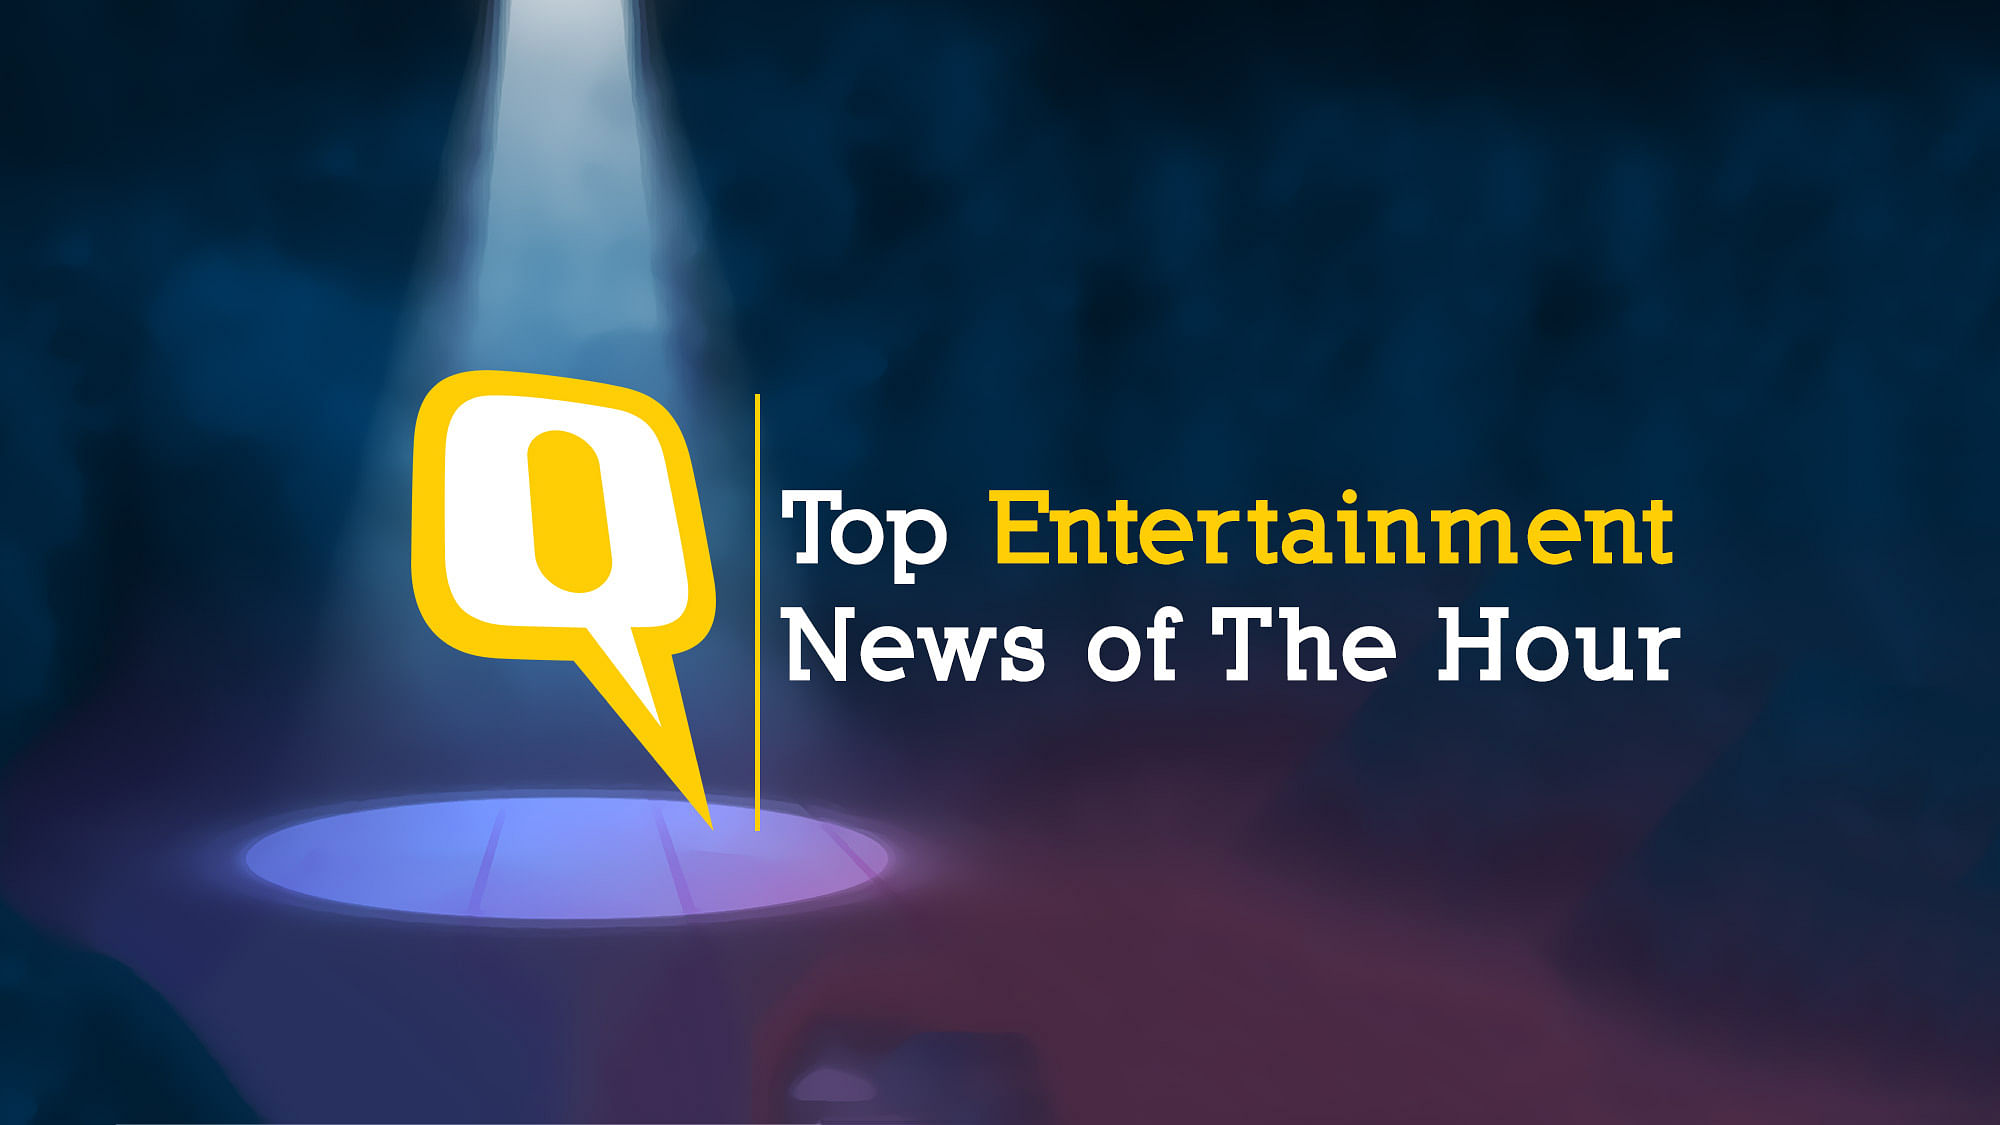 Get all your entertainment updates here.